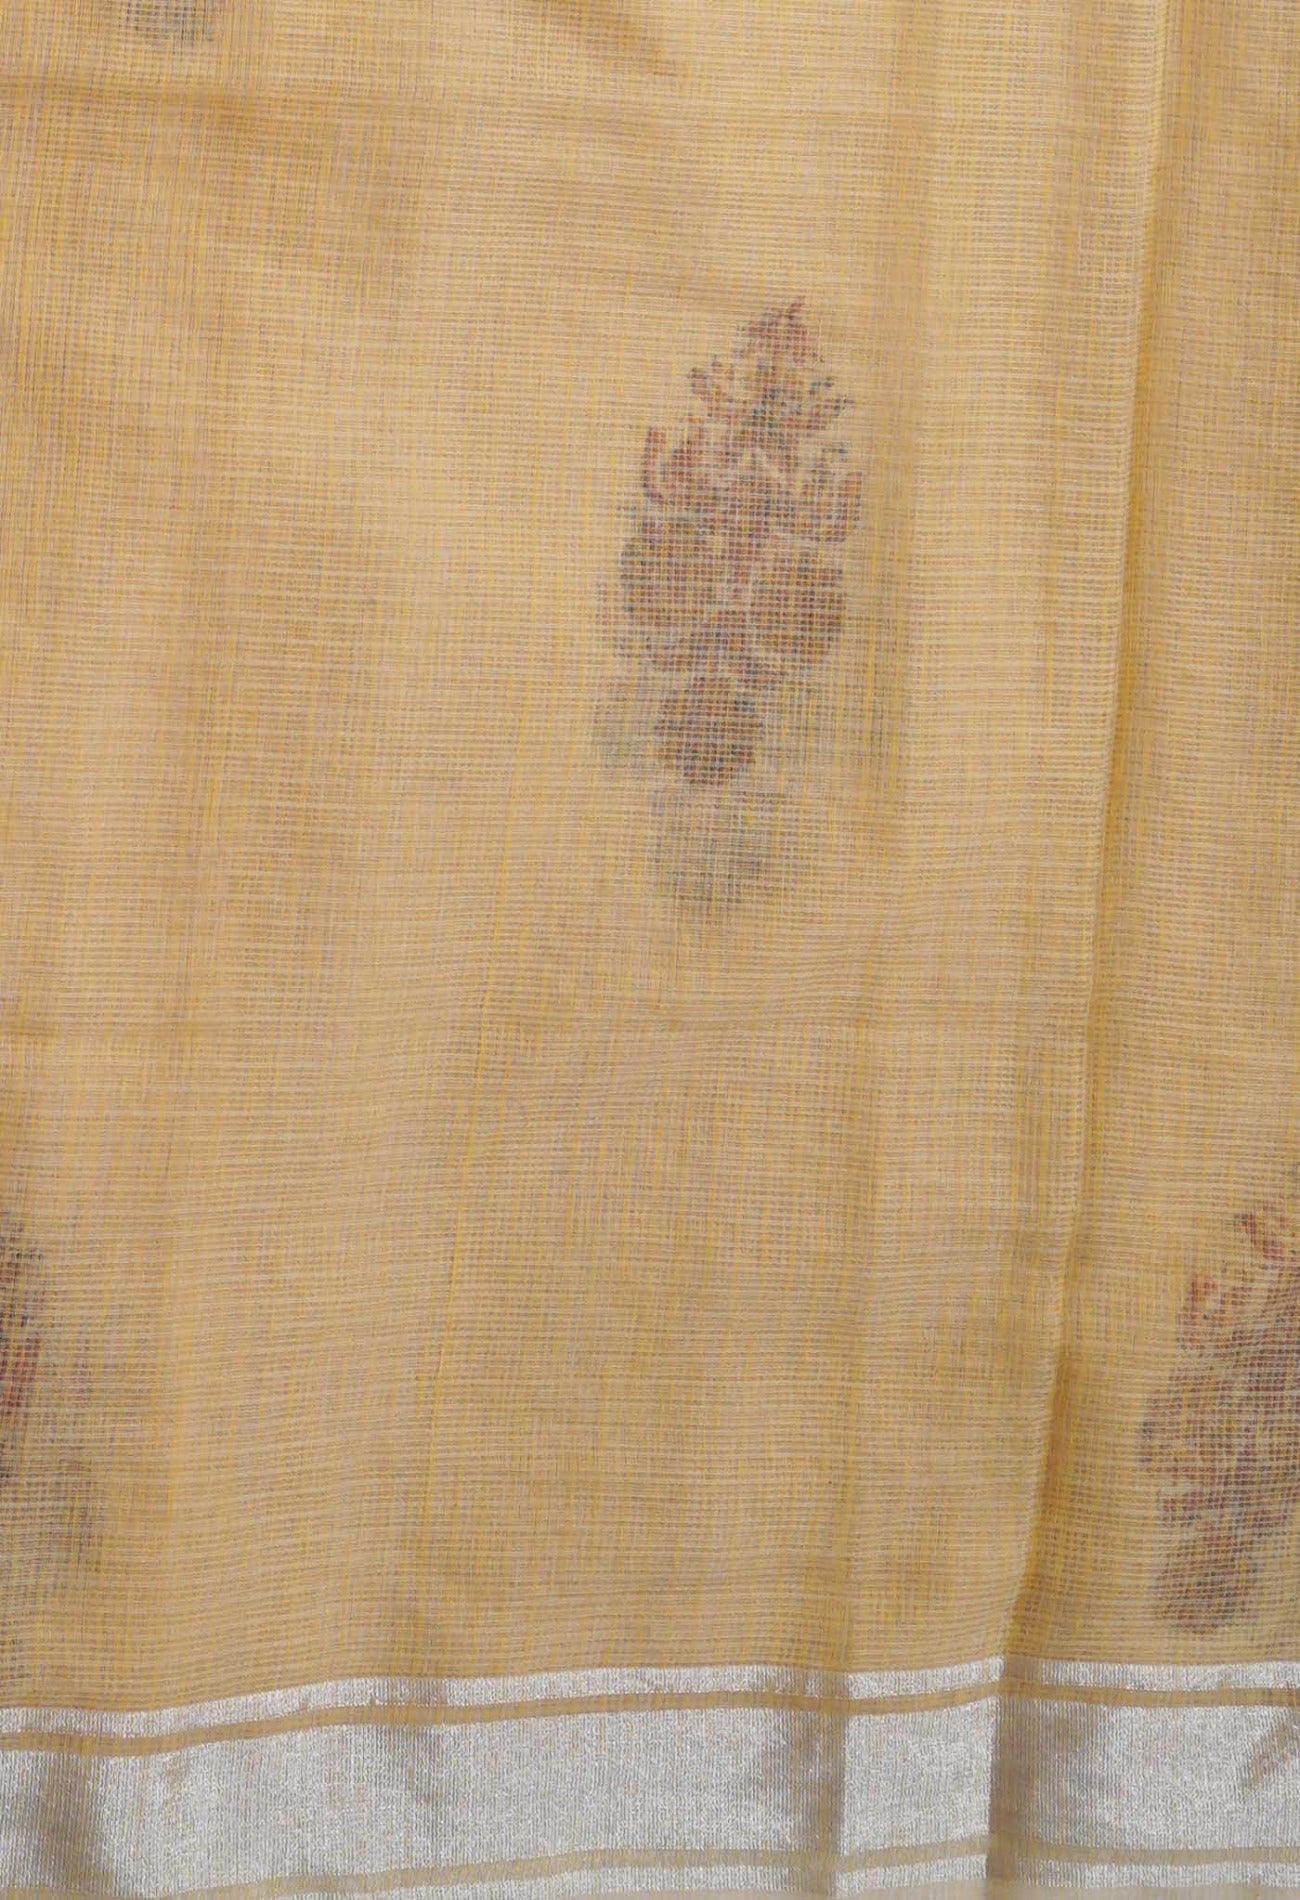 Online Shopping for Yellow Pure Block Printed Cotton Saree with Hand Block Prints from Rajasthan at Unnatisilks.com India
